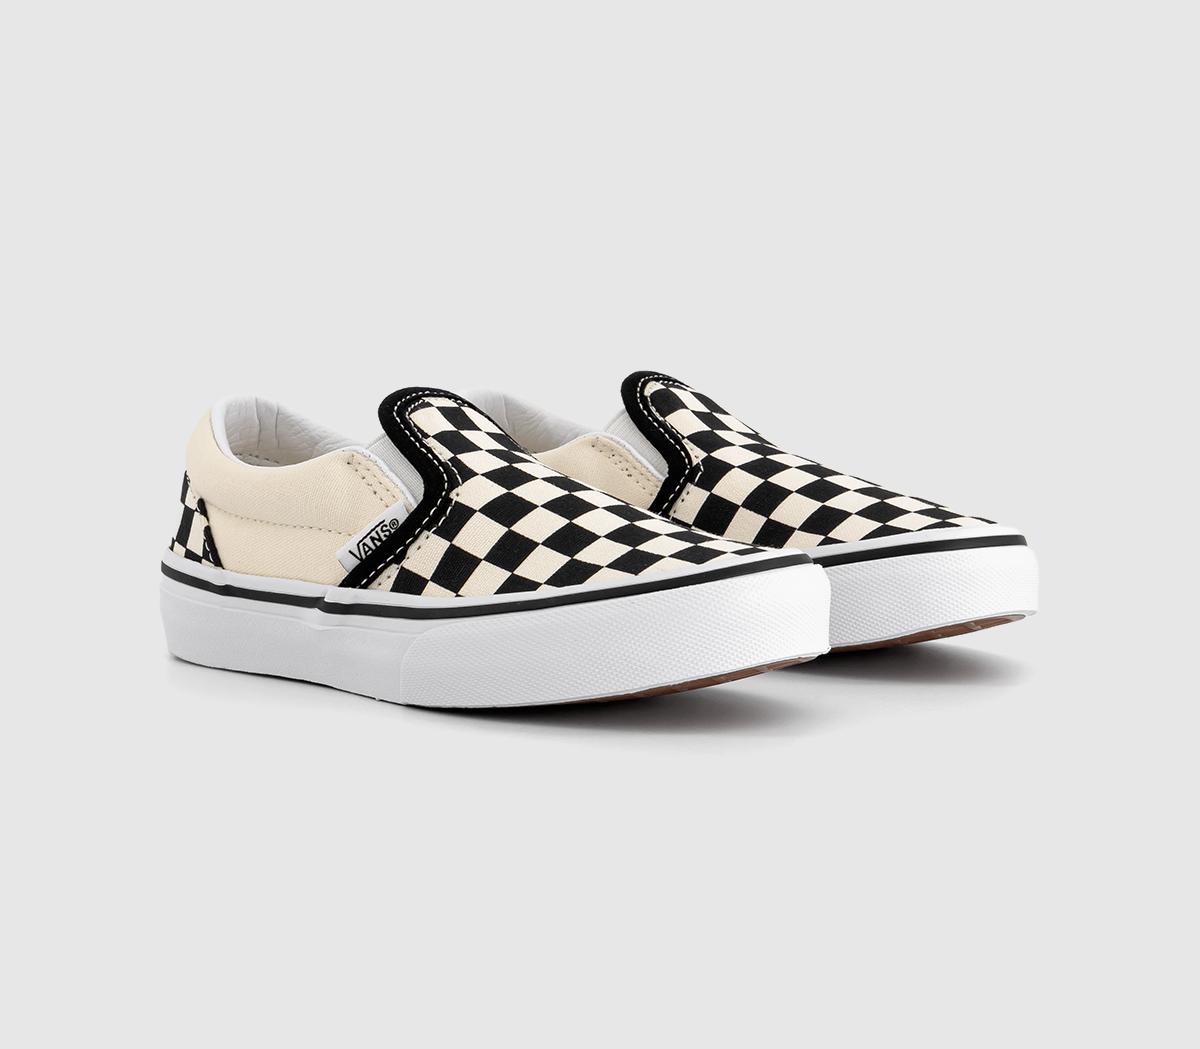 Vans Kids Black And White Checkerboard Classic Slip On Trainers, Size: 13 Youth